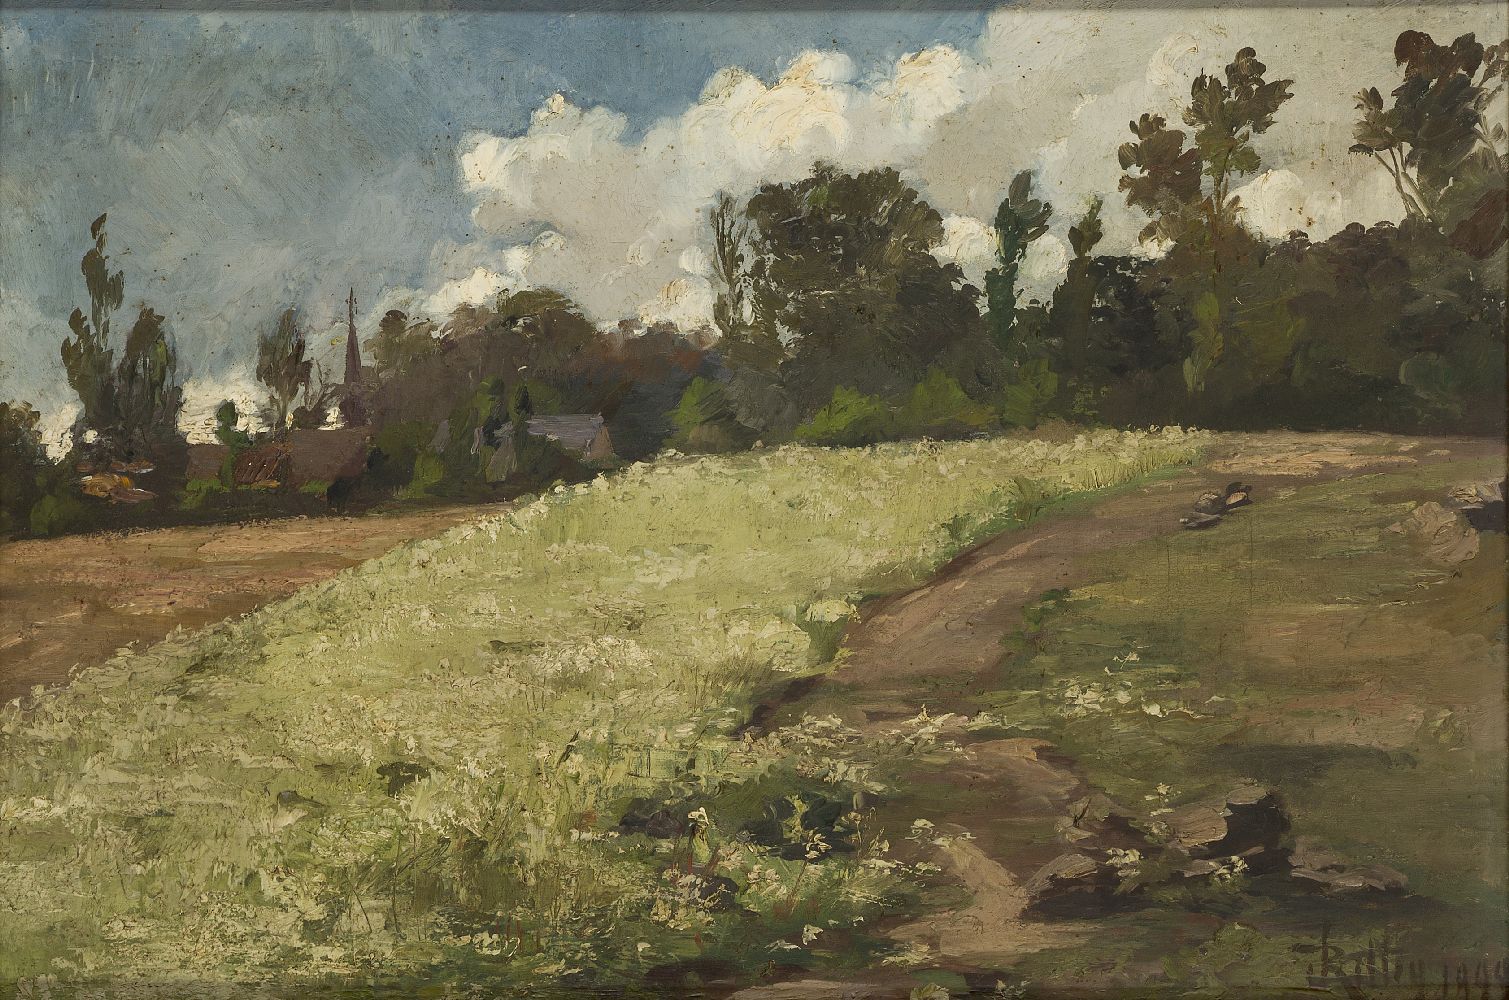 John Rettig, America 1858-1932- Landscape, 1899; oil on canvas, signed and date 1899 lower right;